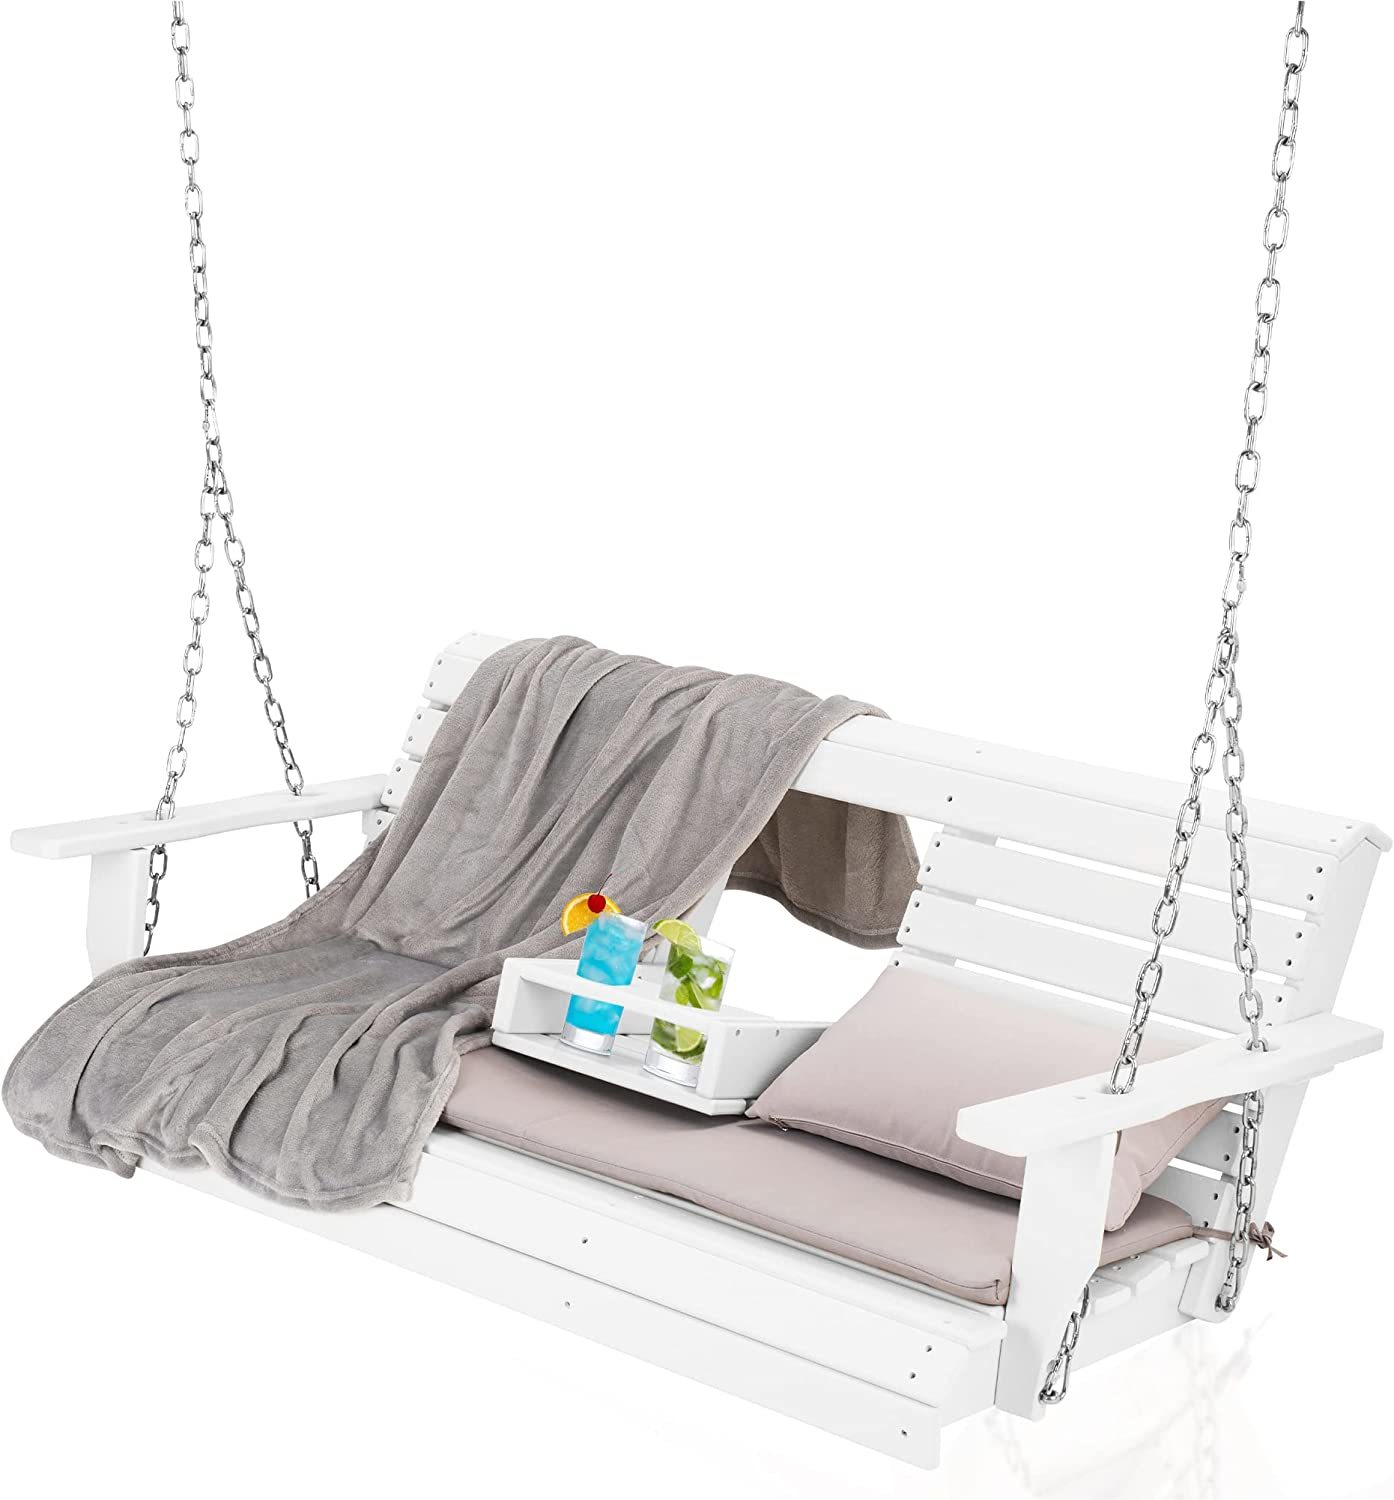 Patio Swinging Bench For Patios, Backyard Hdpe Wooden Seating, Sturdy Steel - $518.92